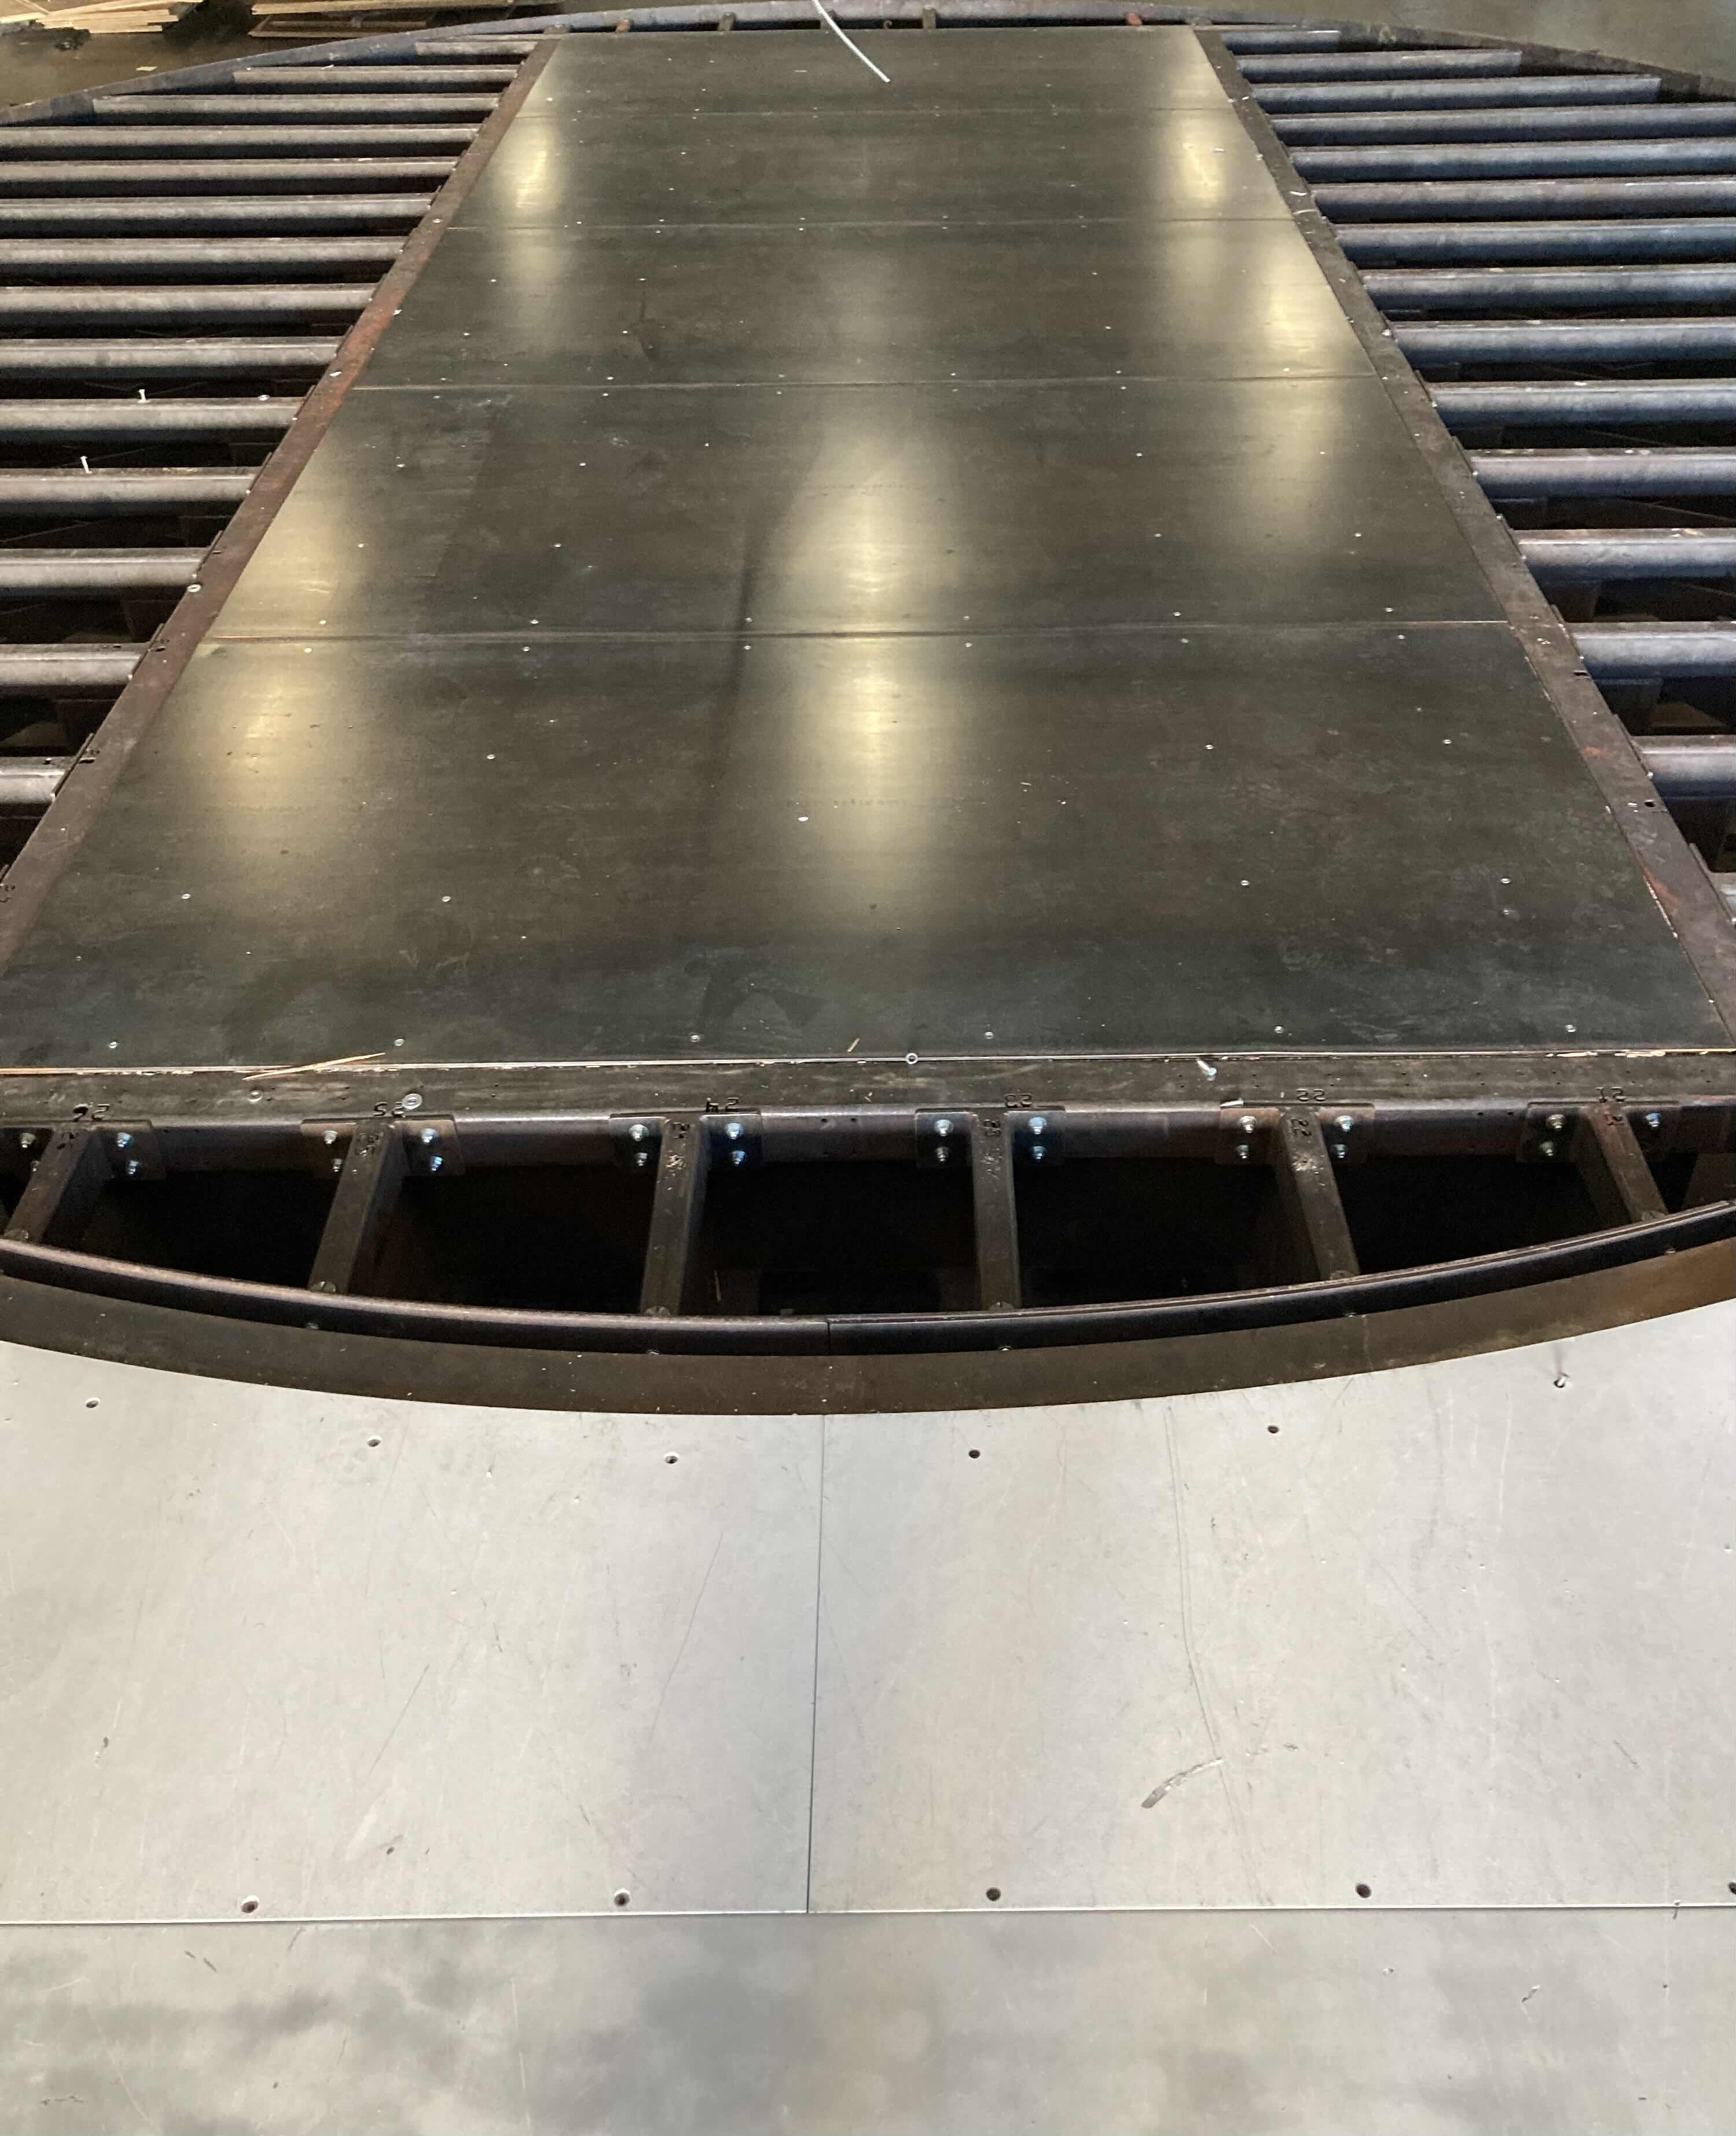 Photo 10 of CUSTOM FABRICATED HEAVY-DUTY STEEL AIR HOSE OPERATED VEHICLE PLATFORM W 19 AIR HOSES FOR BAG LIFT- VARIOUS LENGTHS & PSI CAPACITY 353” X 282” H23” (APPOX 2-3TONS)